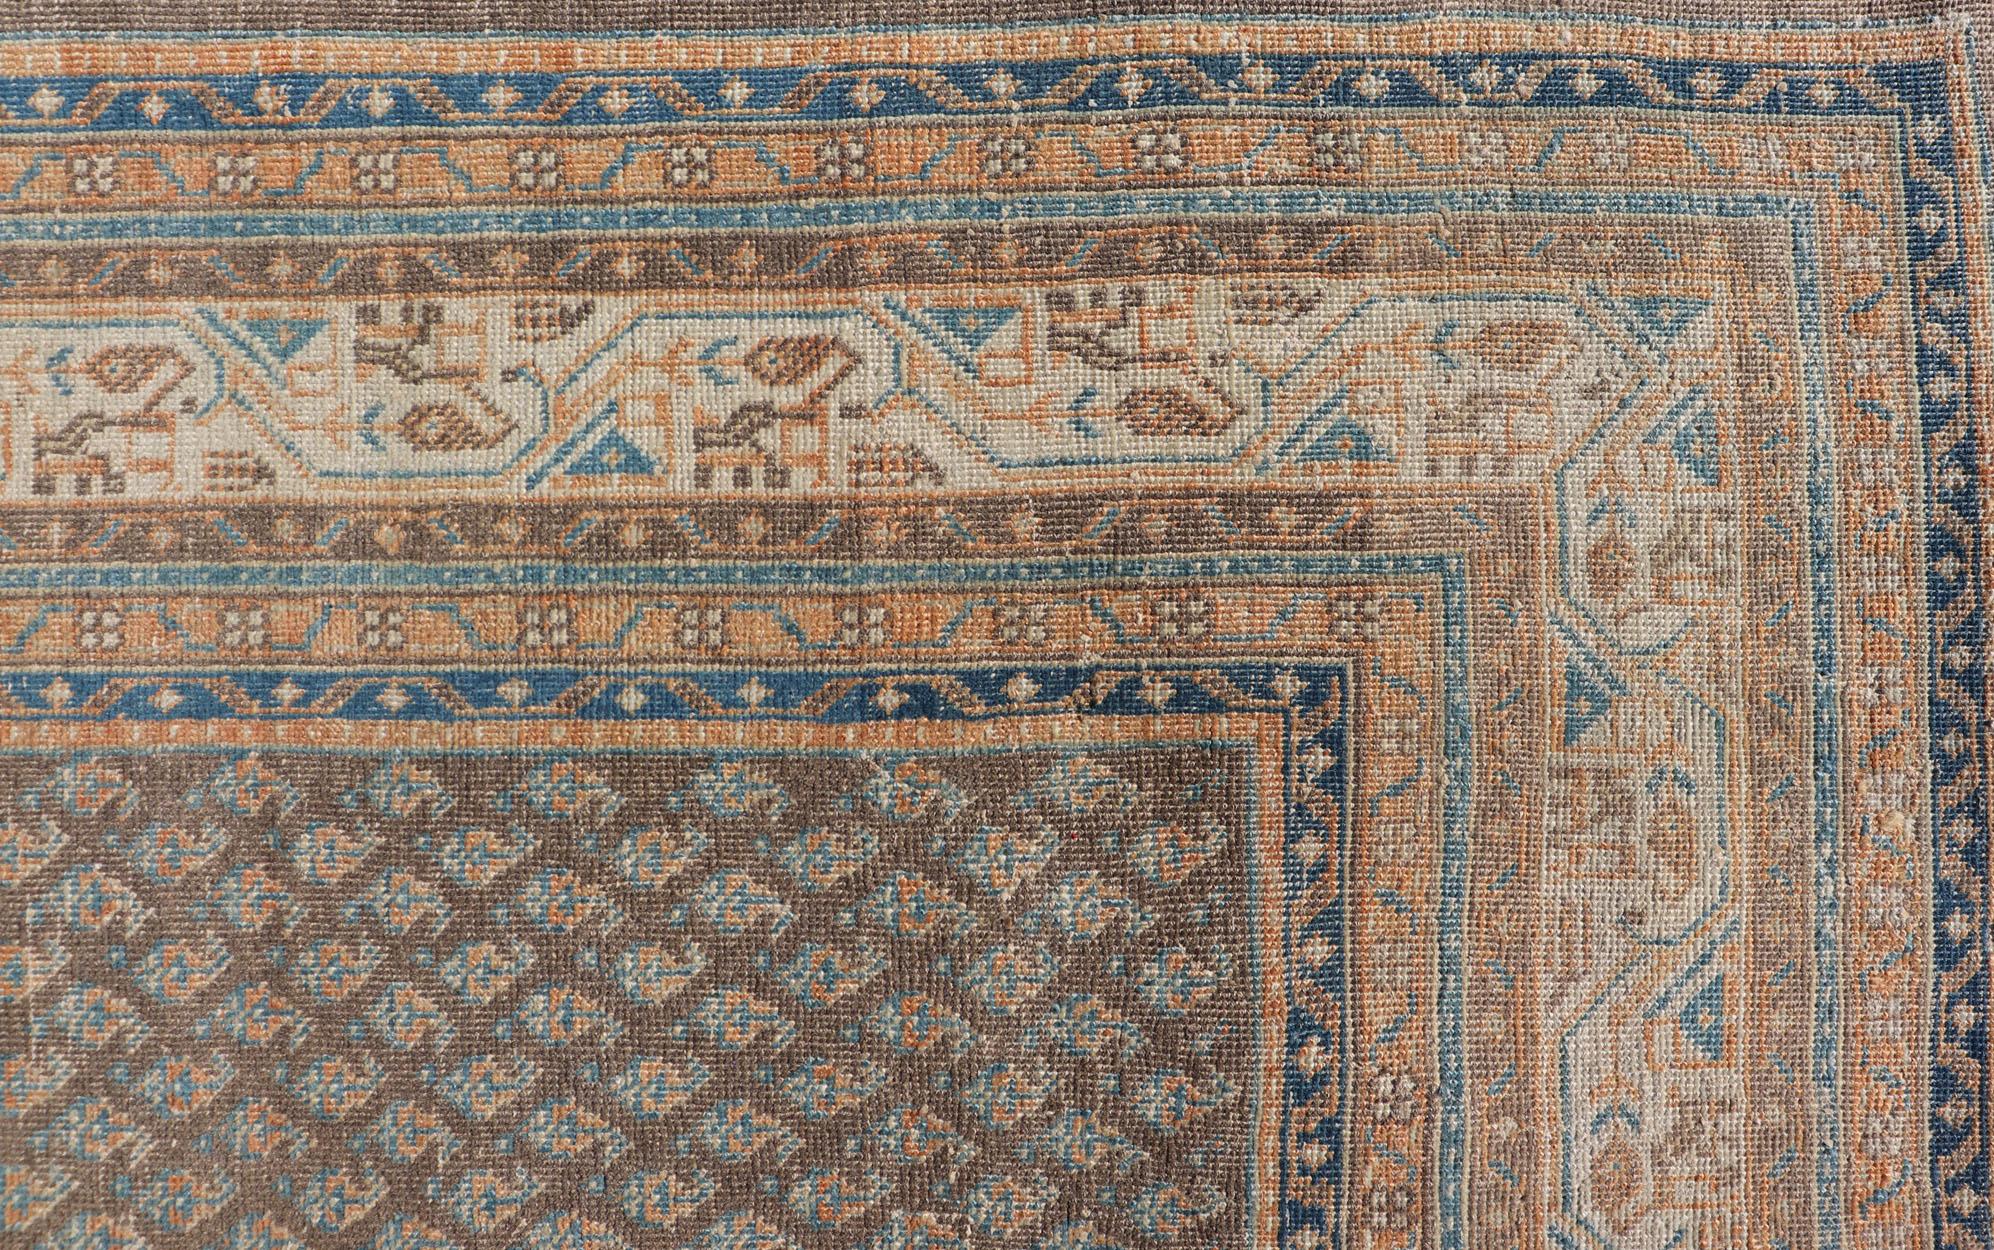 Hand-Knotted Persian Tabriz Rug with All-Over Saraband Design in Brown and Blue